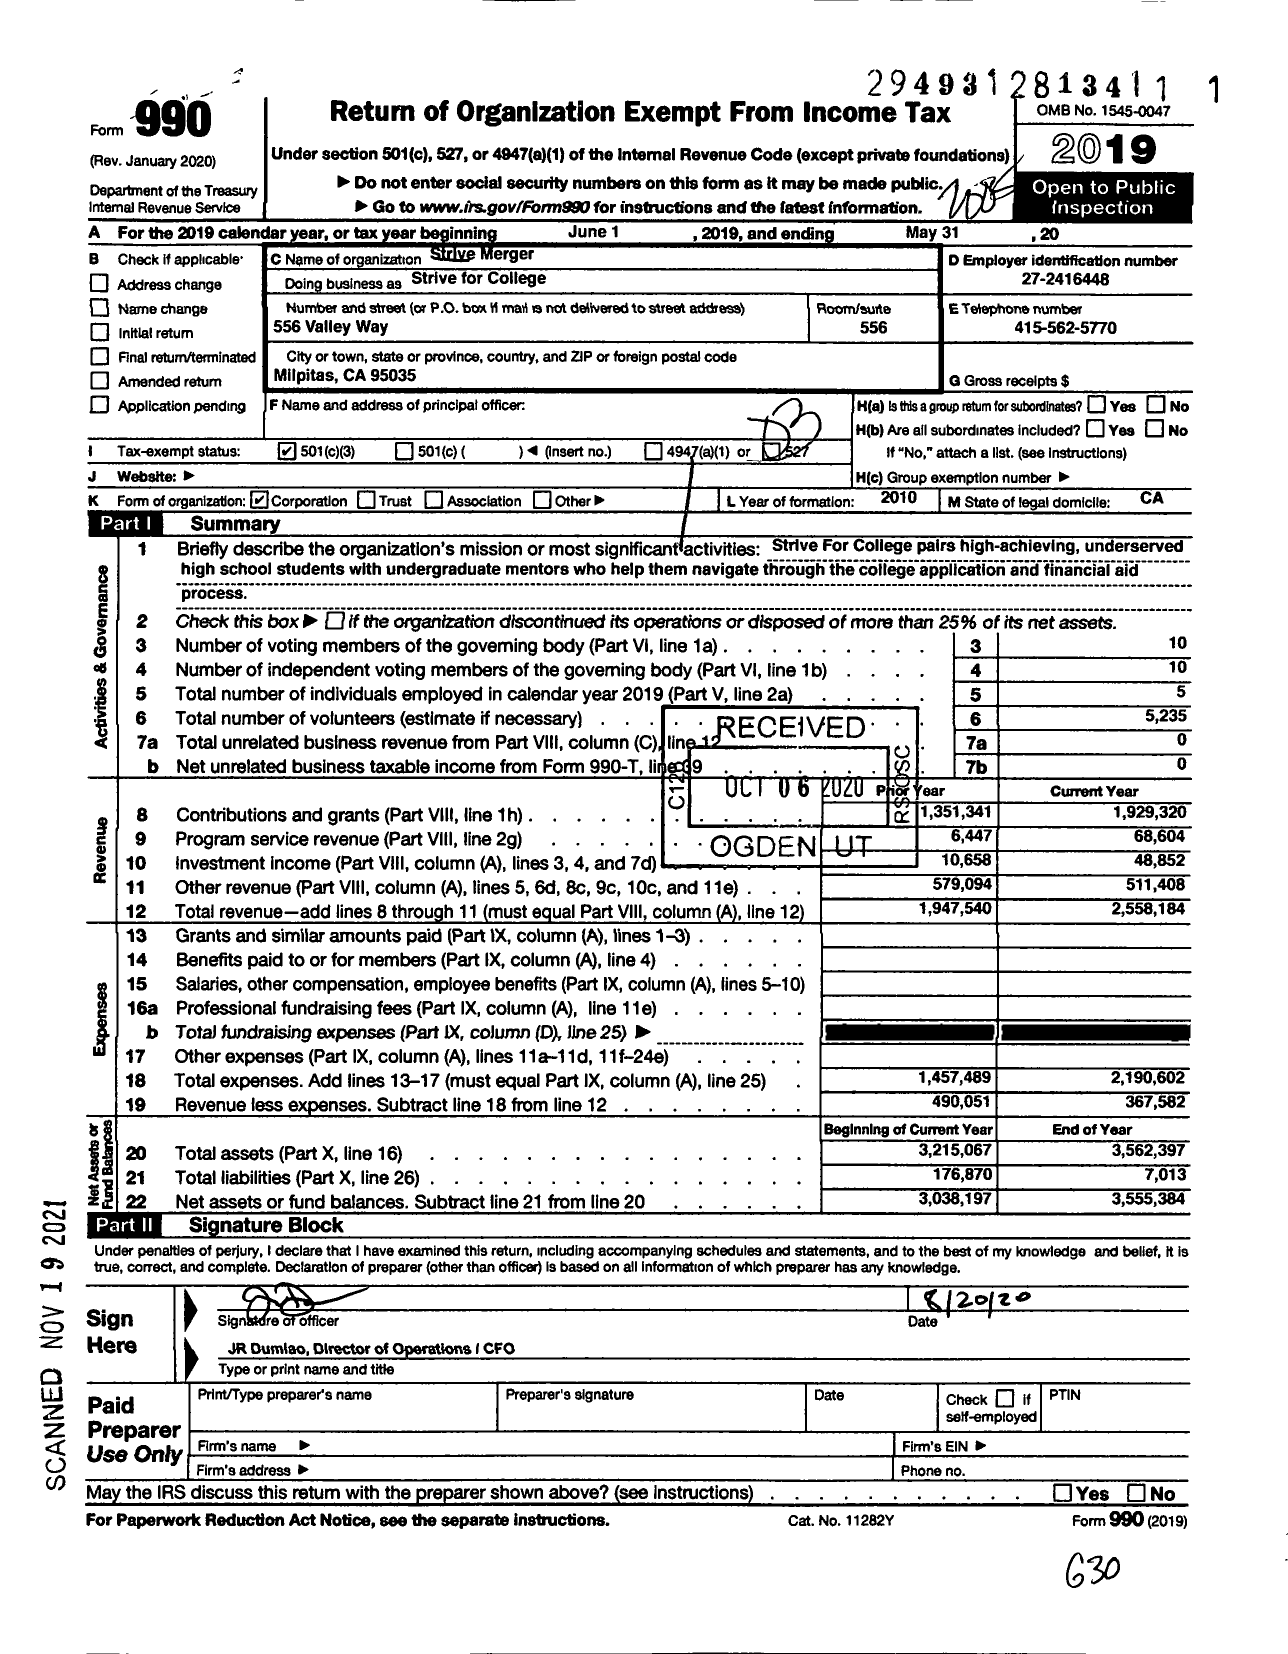 Image of first page of 2019 Form 990 for UStrive